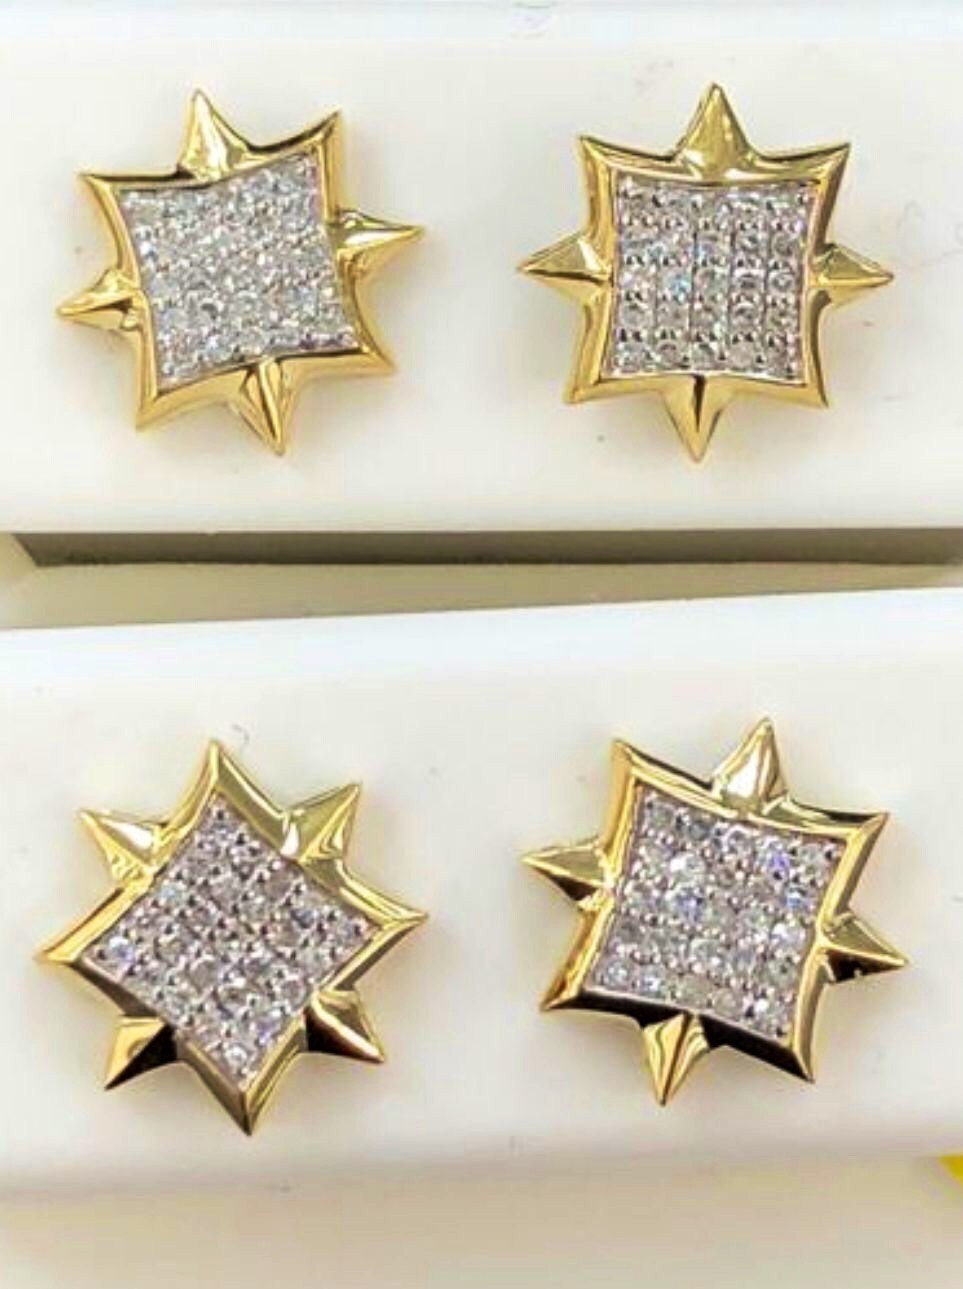 10k solid gold designer real diamond earrings. Not CZ not moissanite not plated authenticity certificate included.